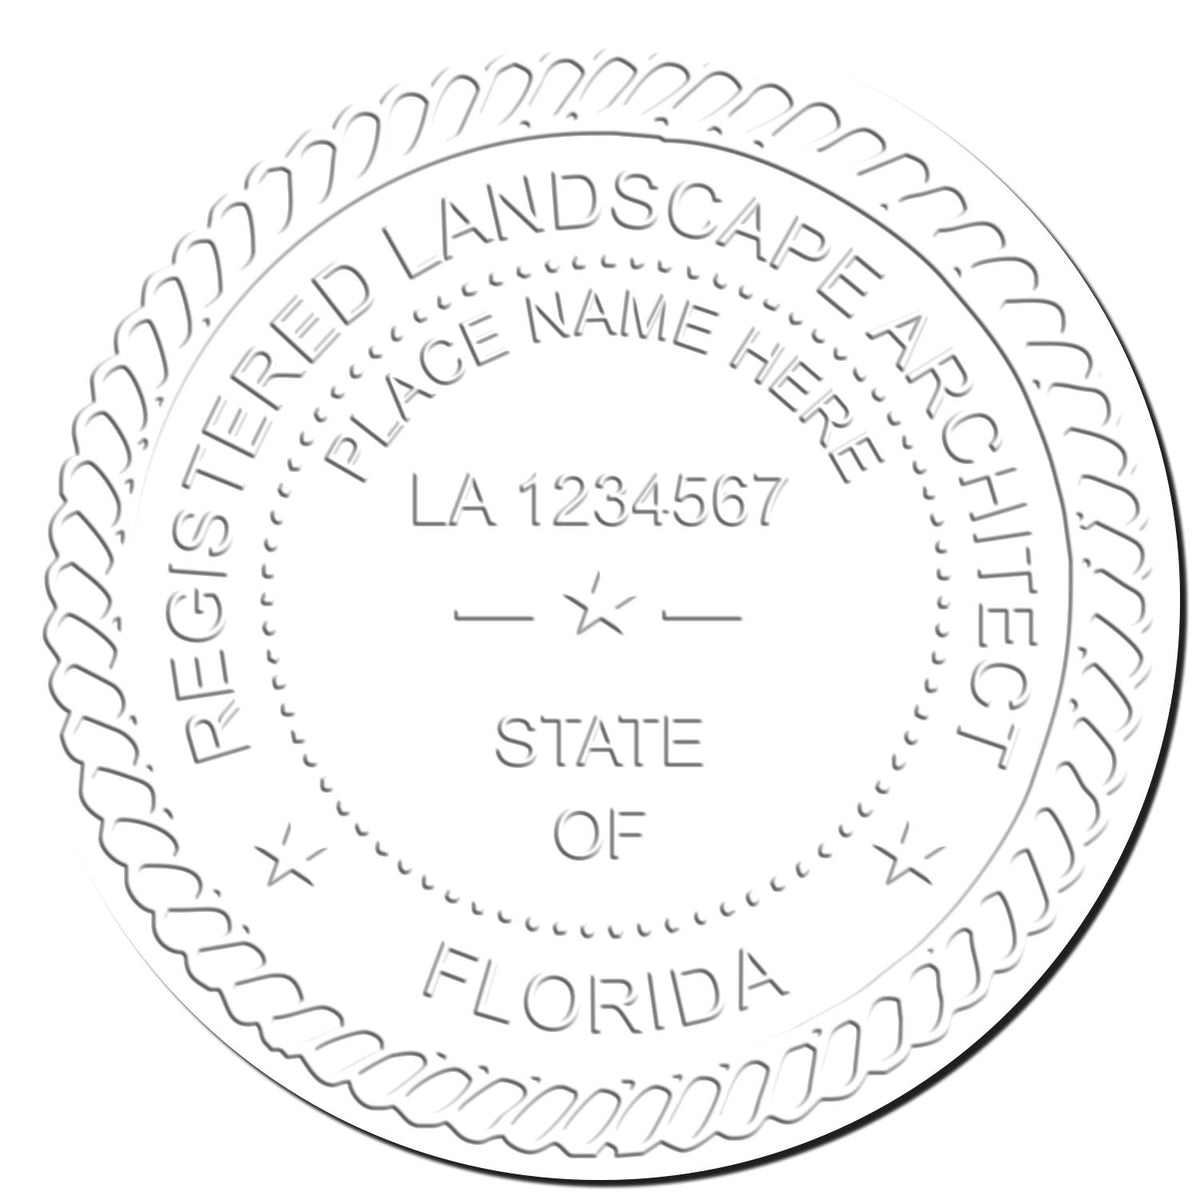 This paper is stamped with a sample imprint of the Soft Pocket Florida Landscape Architect Embosser, signifying its quality and reliability.